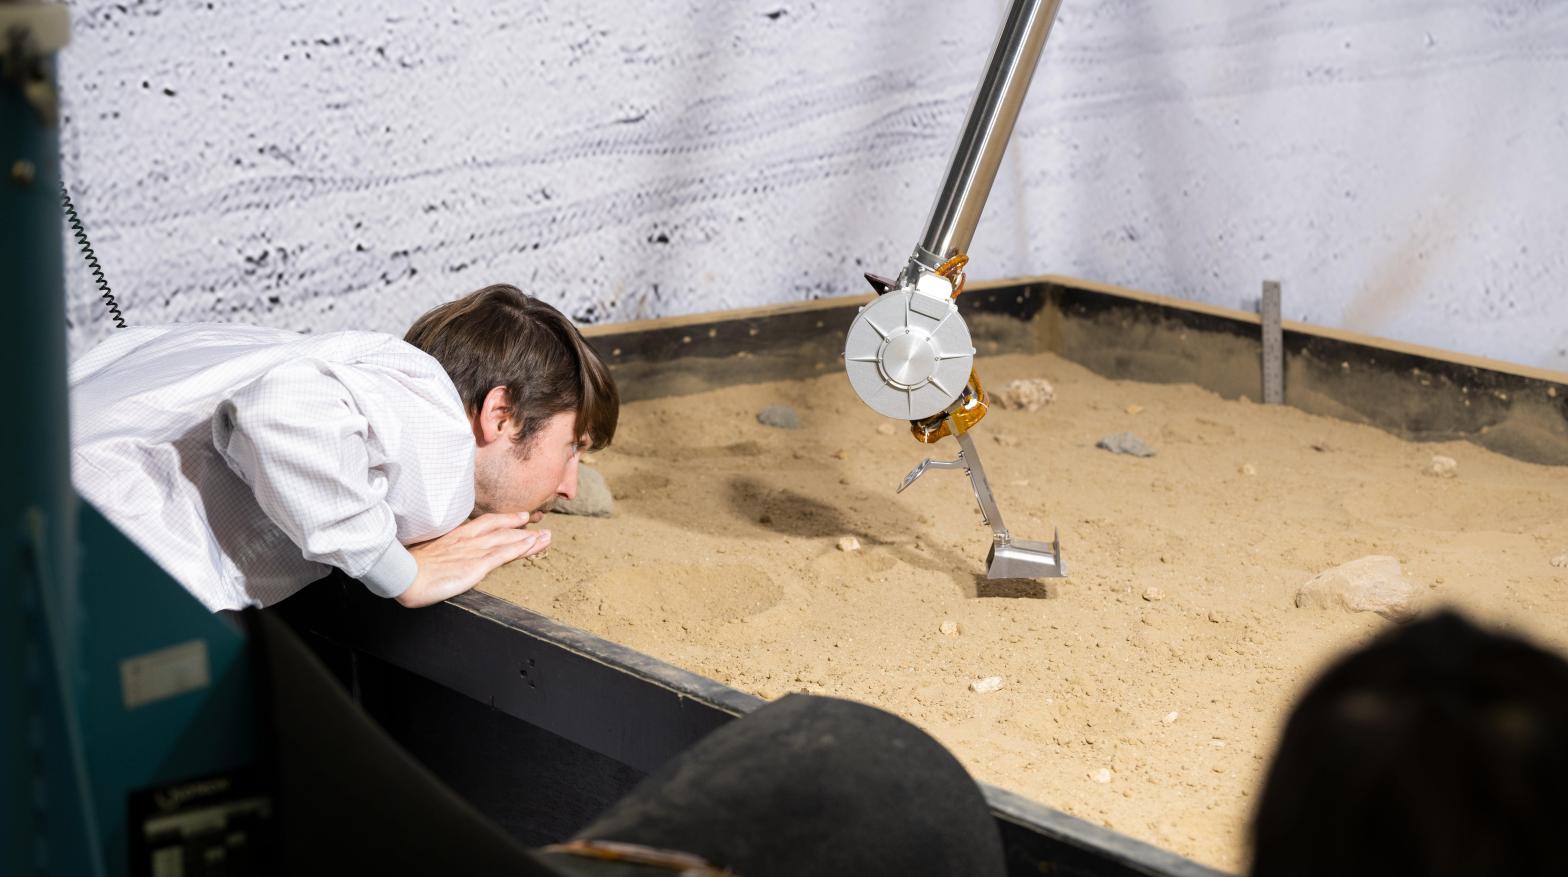 An engineer at NASA's Jet Propulsion Laboratory observes the COLDArm being tested in a bed of simulated lunar soil. (Image: NASA/JPL-Caltech)